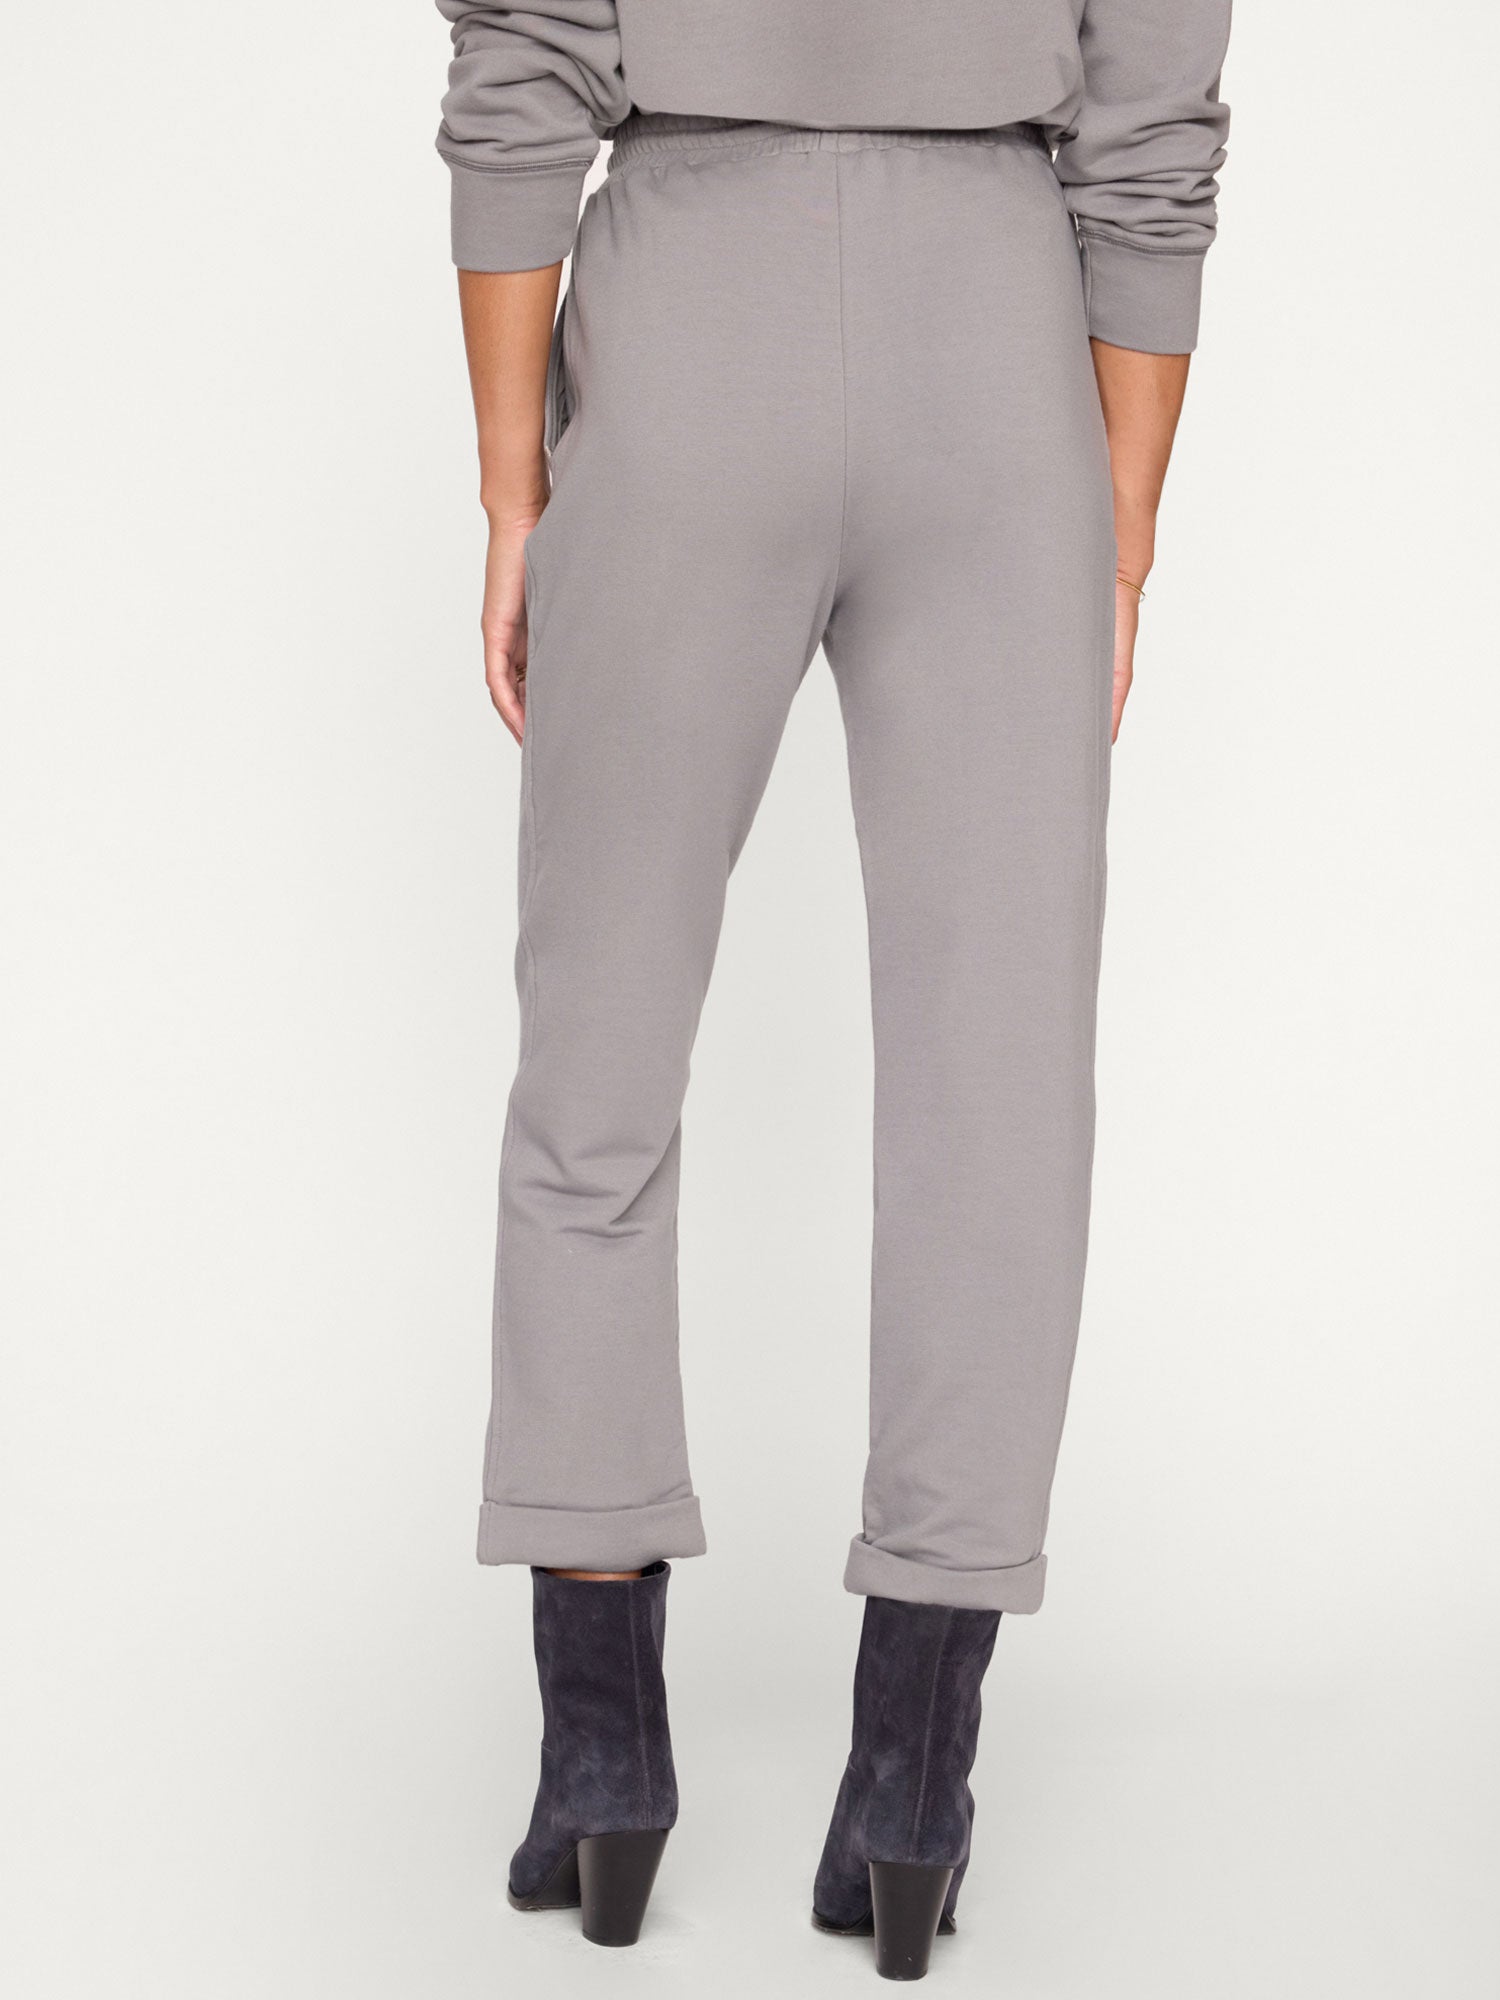 Penn French Terry grey ankle pant back view